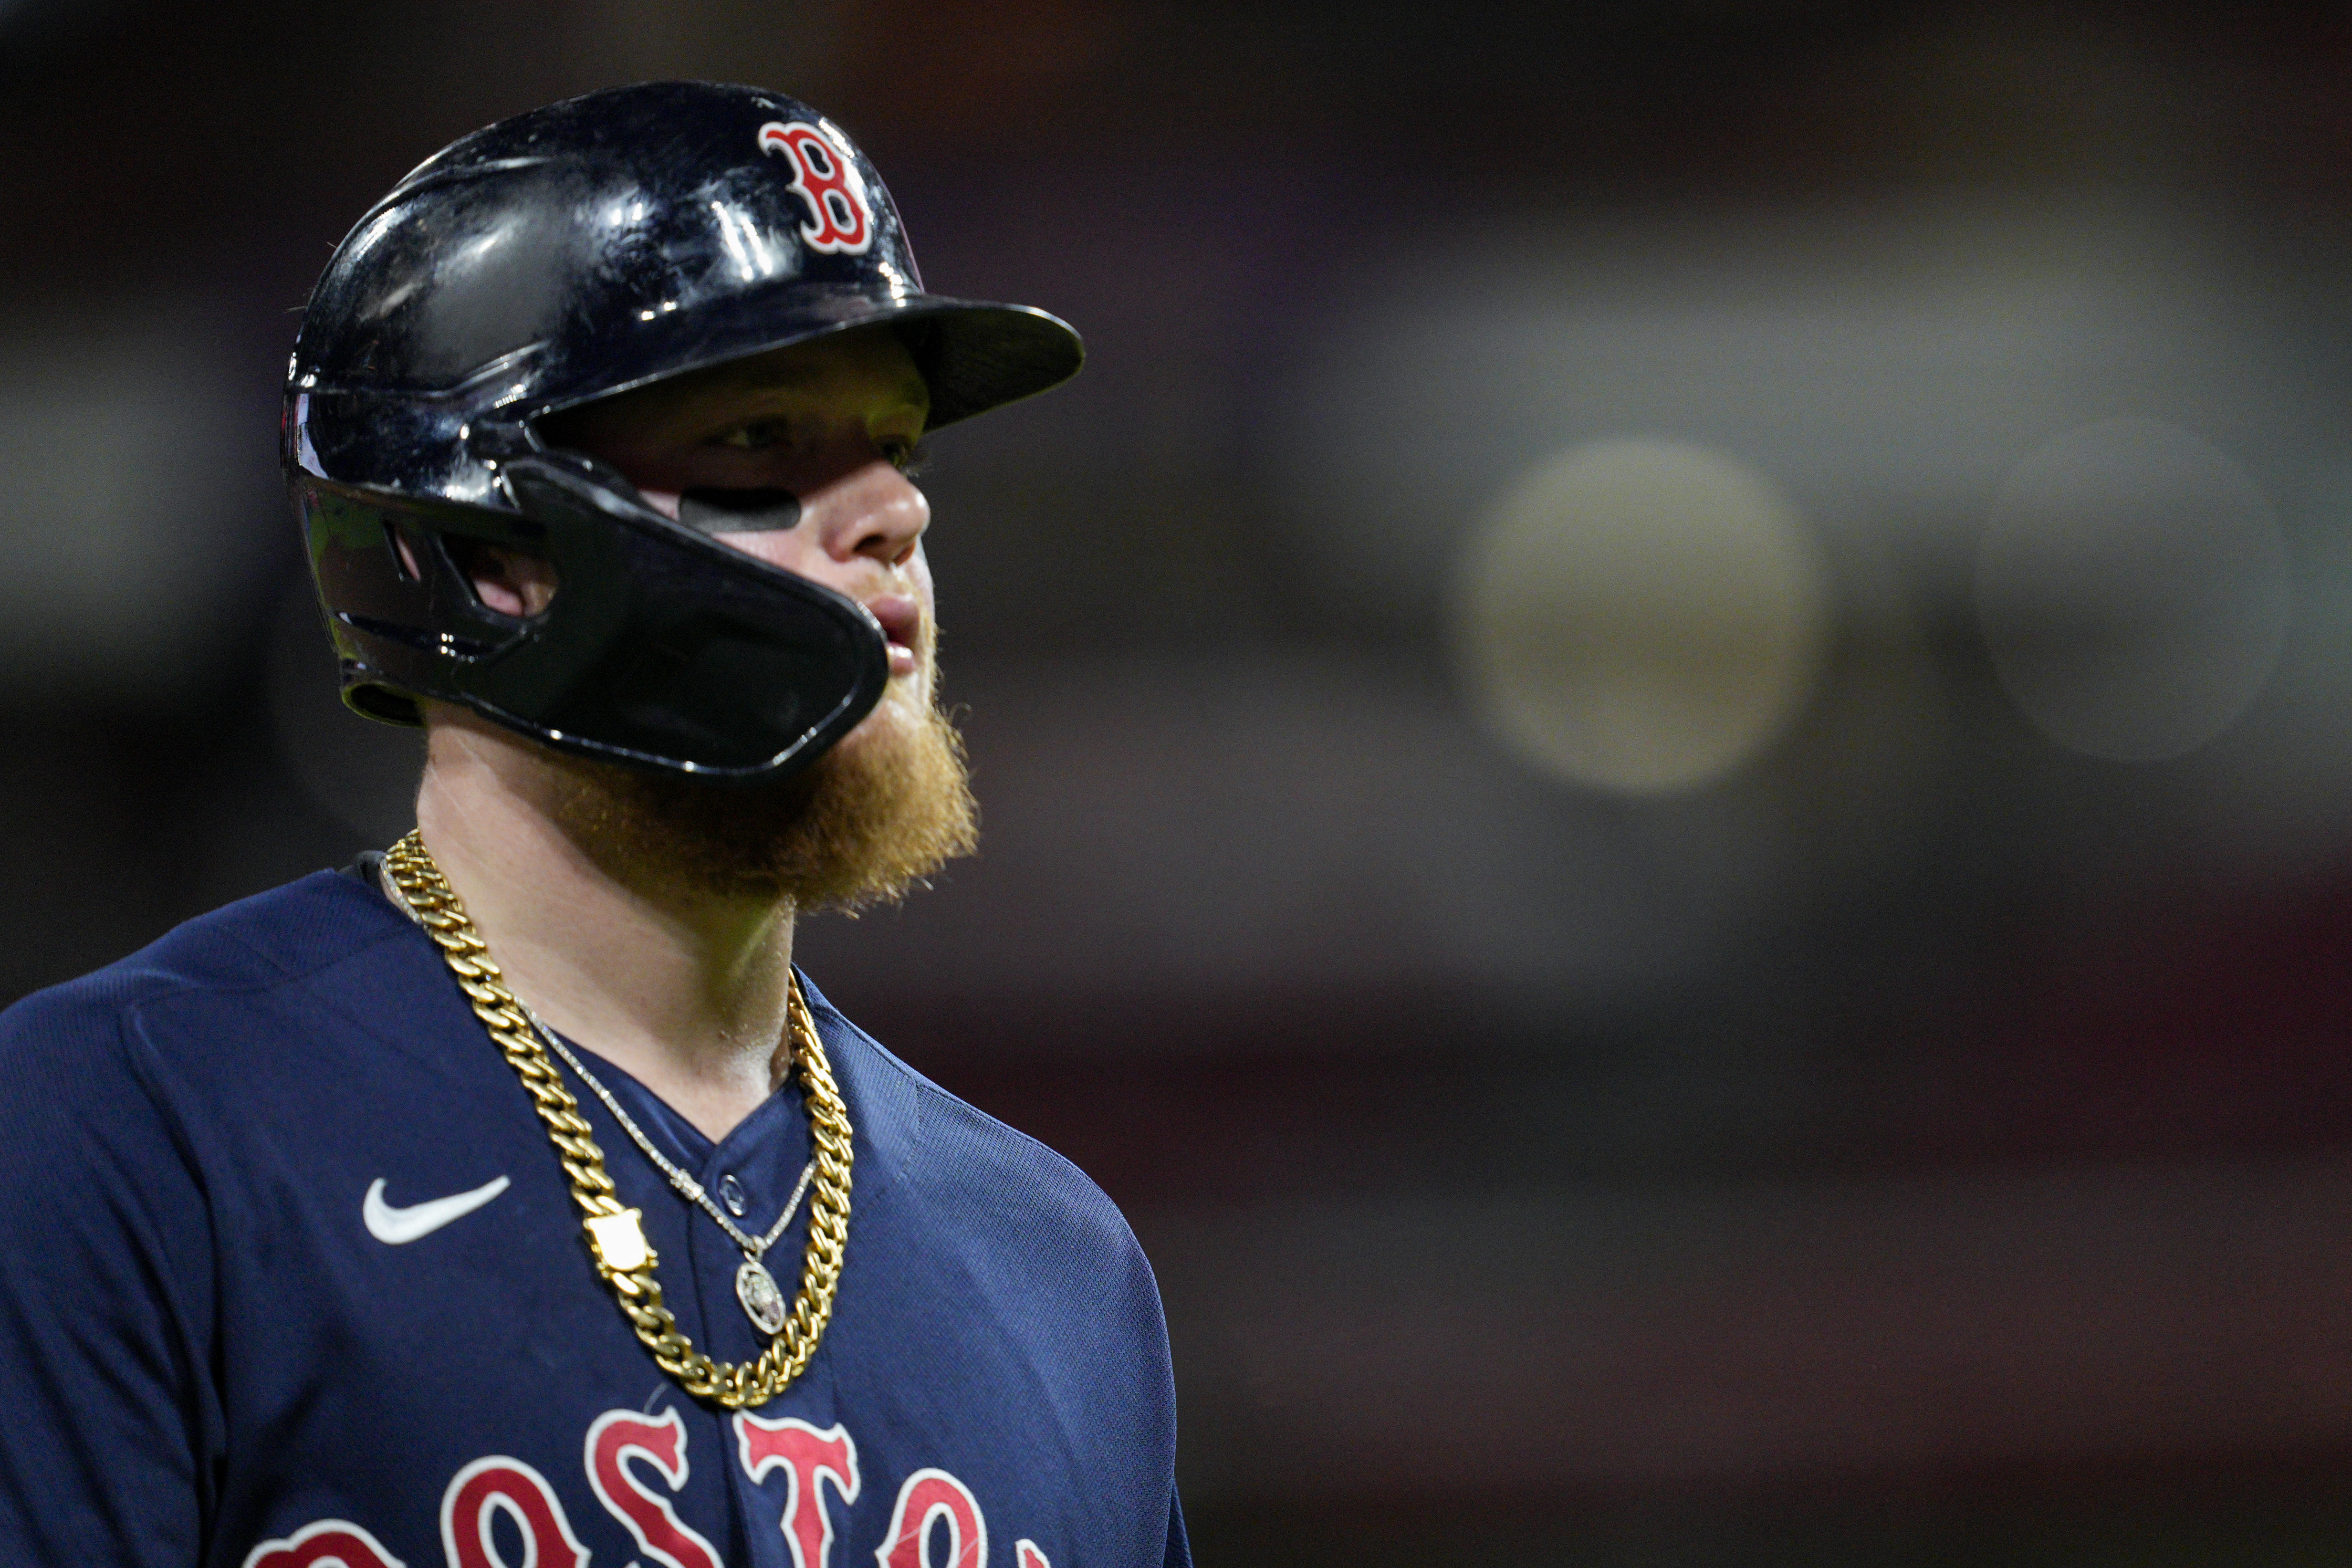 Red Sox's Alex Cora: Alex Verdugo is the player who needs to take